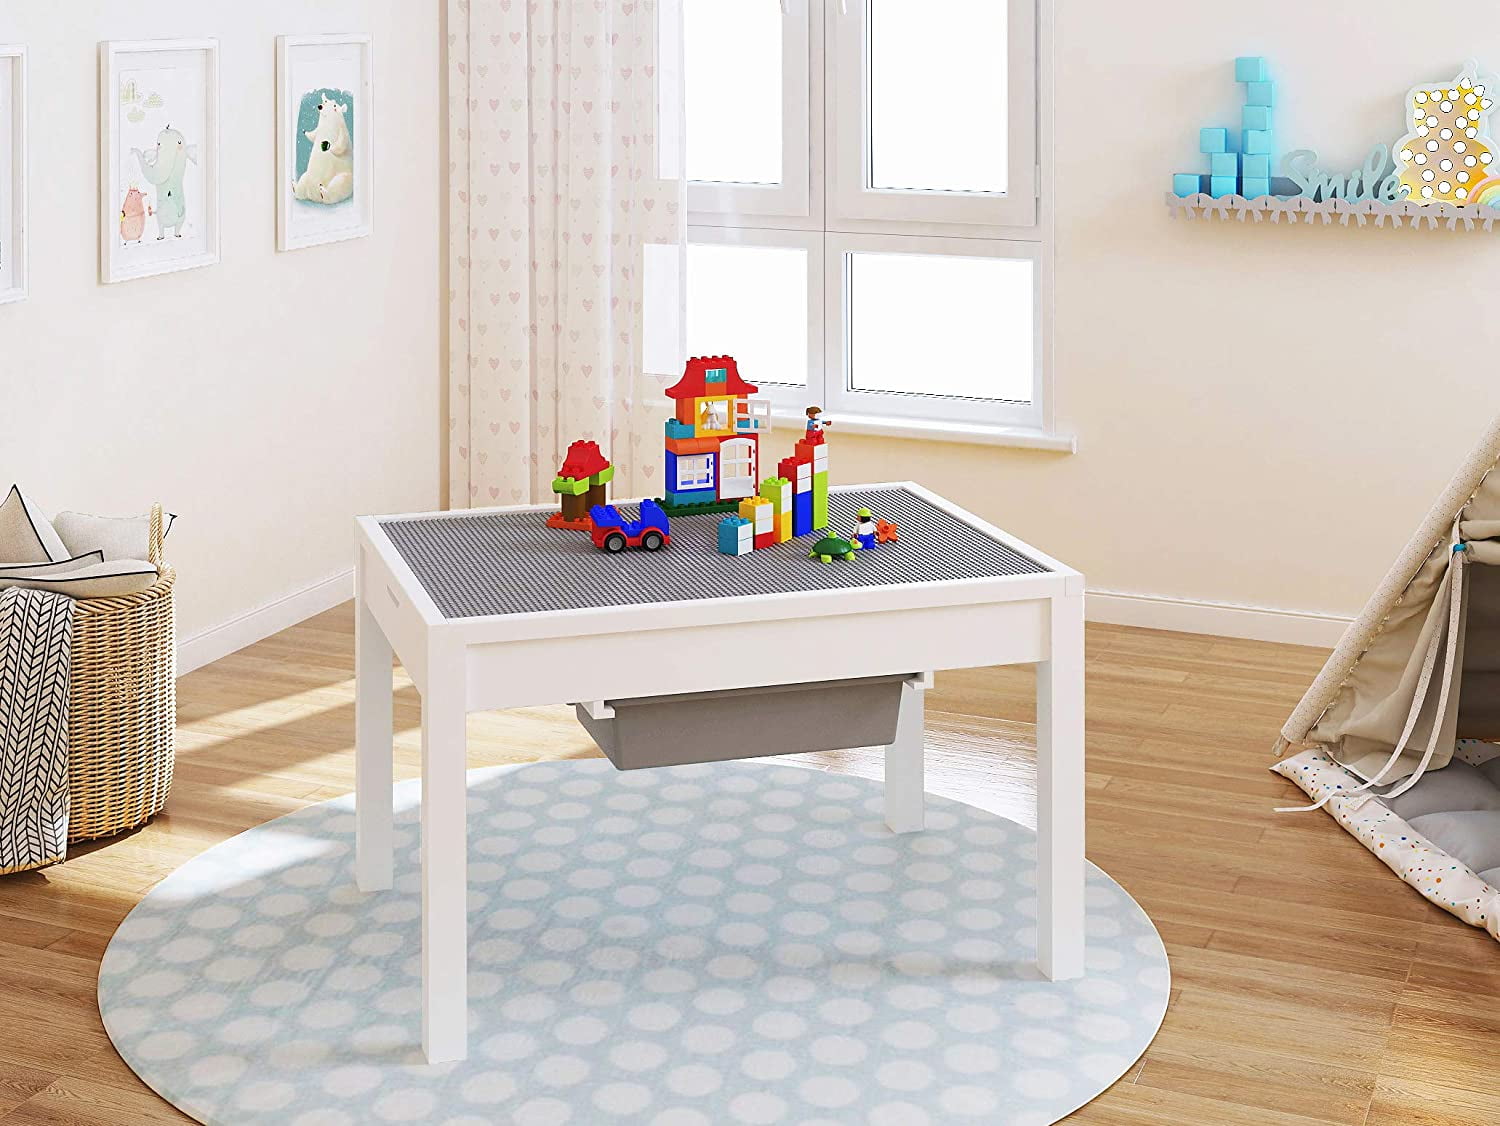 Melissa & Doug Kids Furniture Wooden Art & Activity Table with